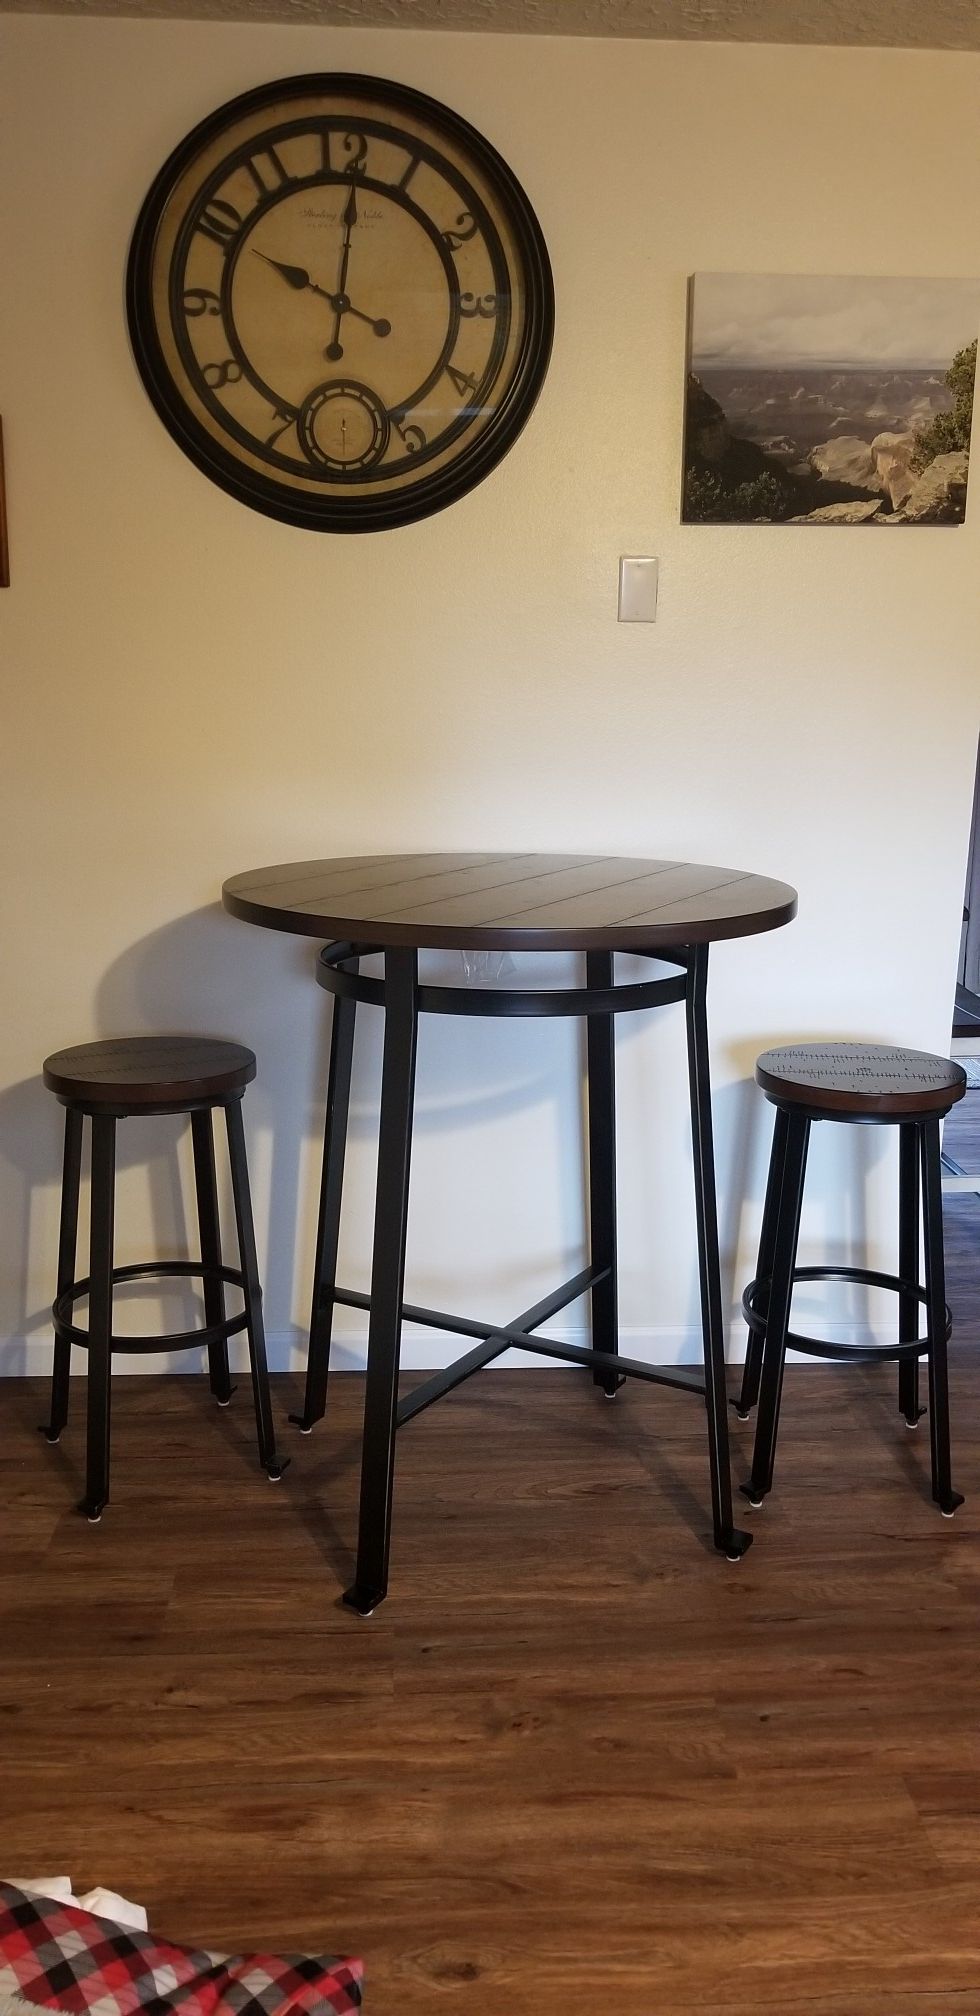 Small kitchen table with stools.